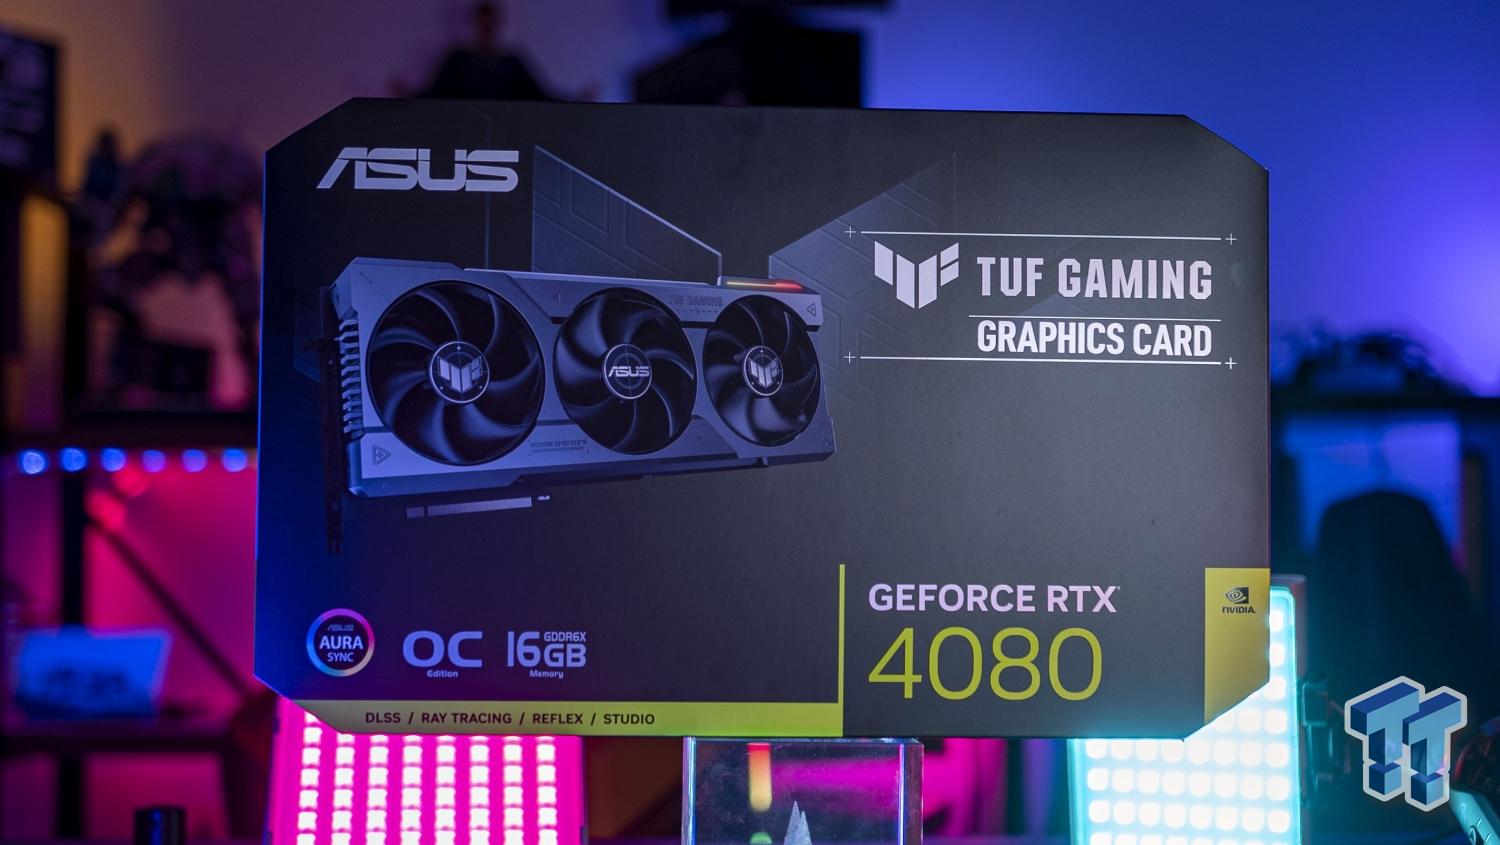 ASUS TUF Gaming GeForce RTX 4080 16GB OC Edition Review - New